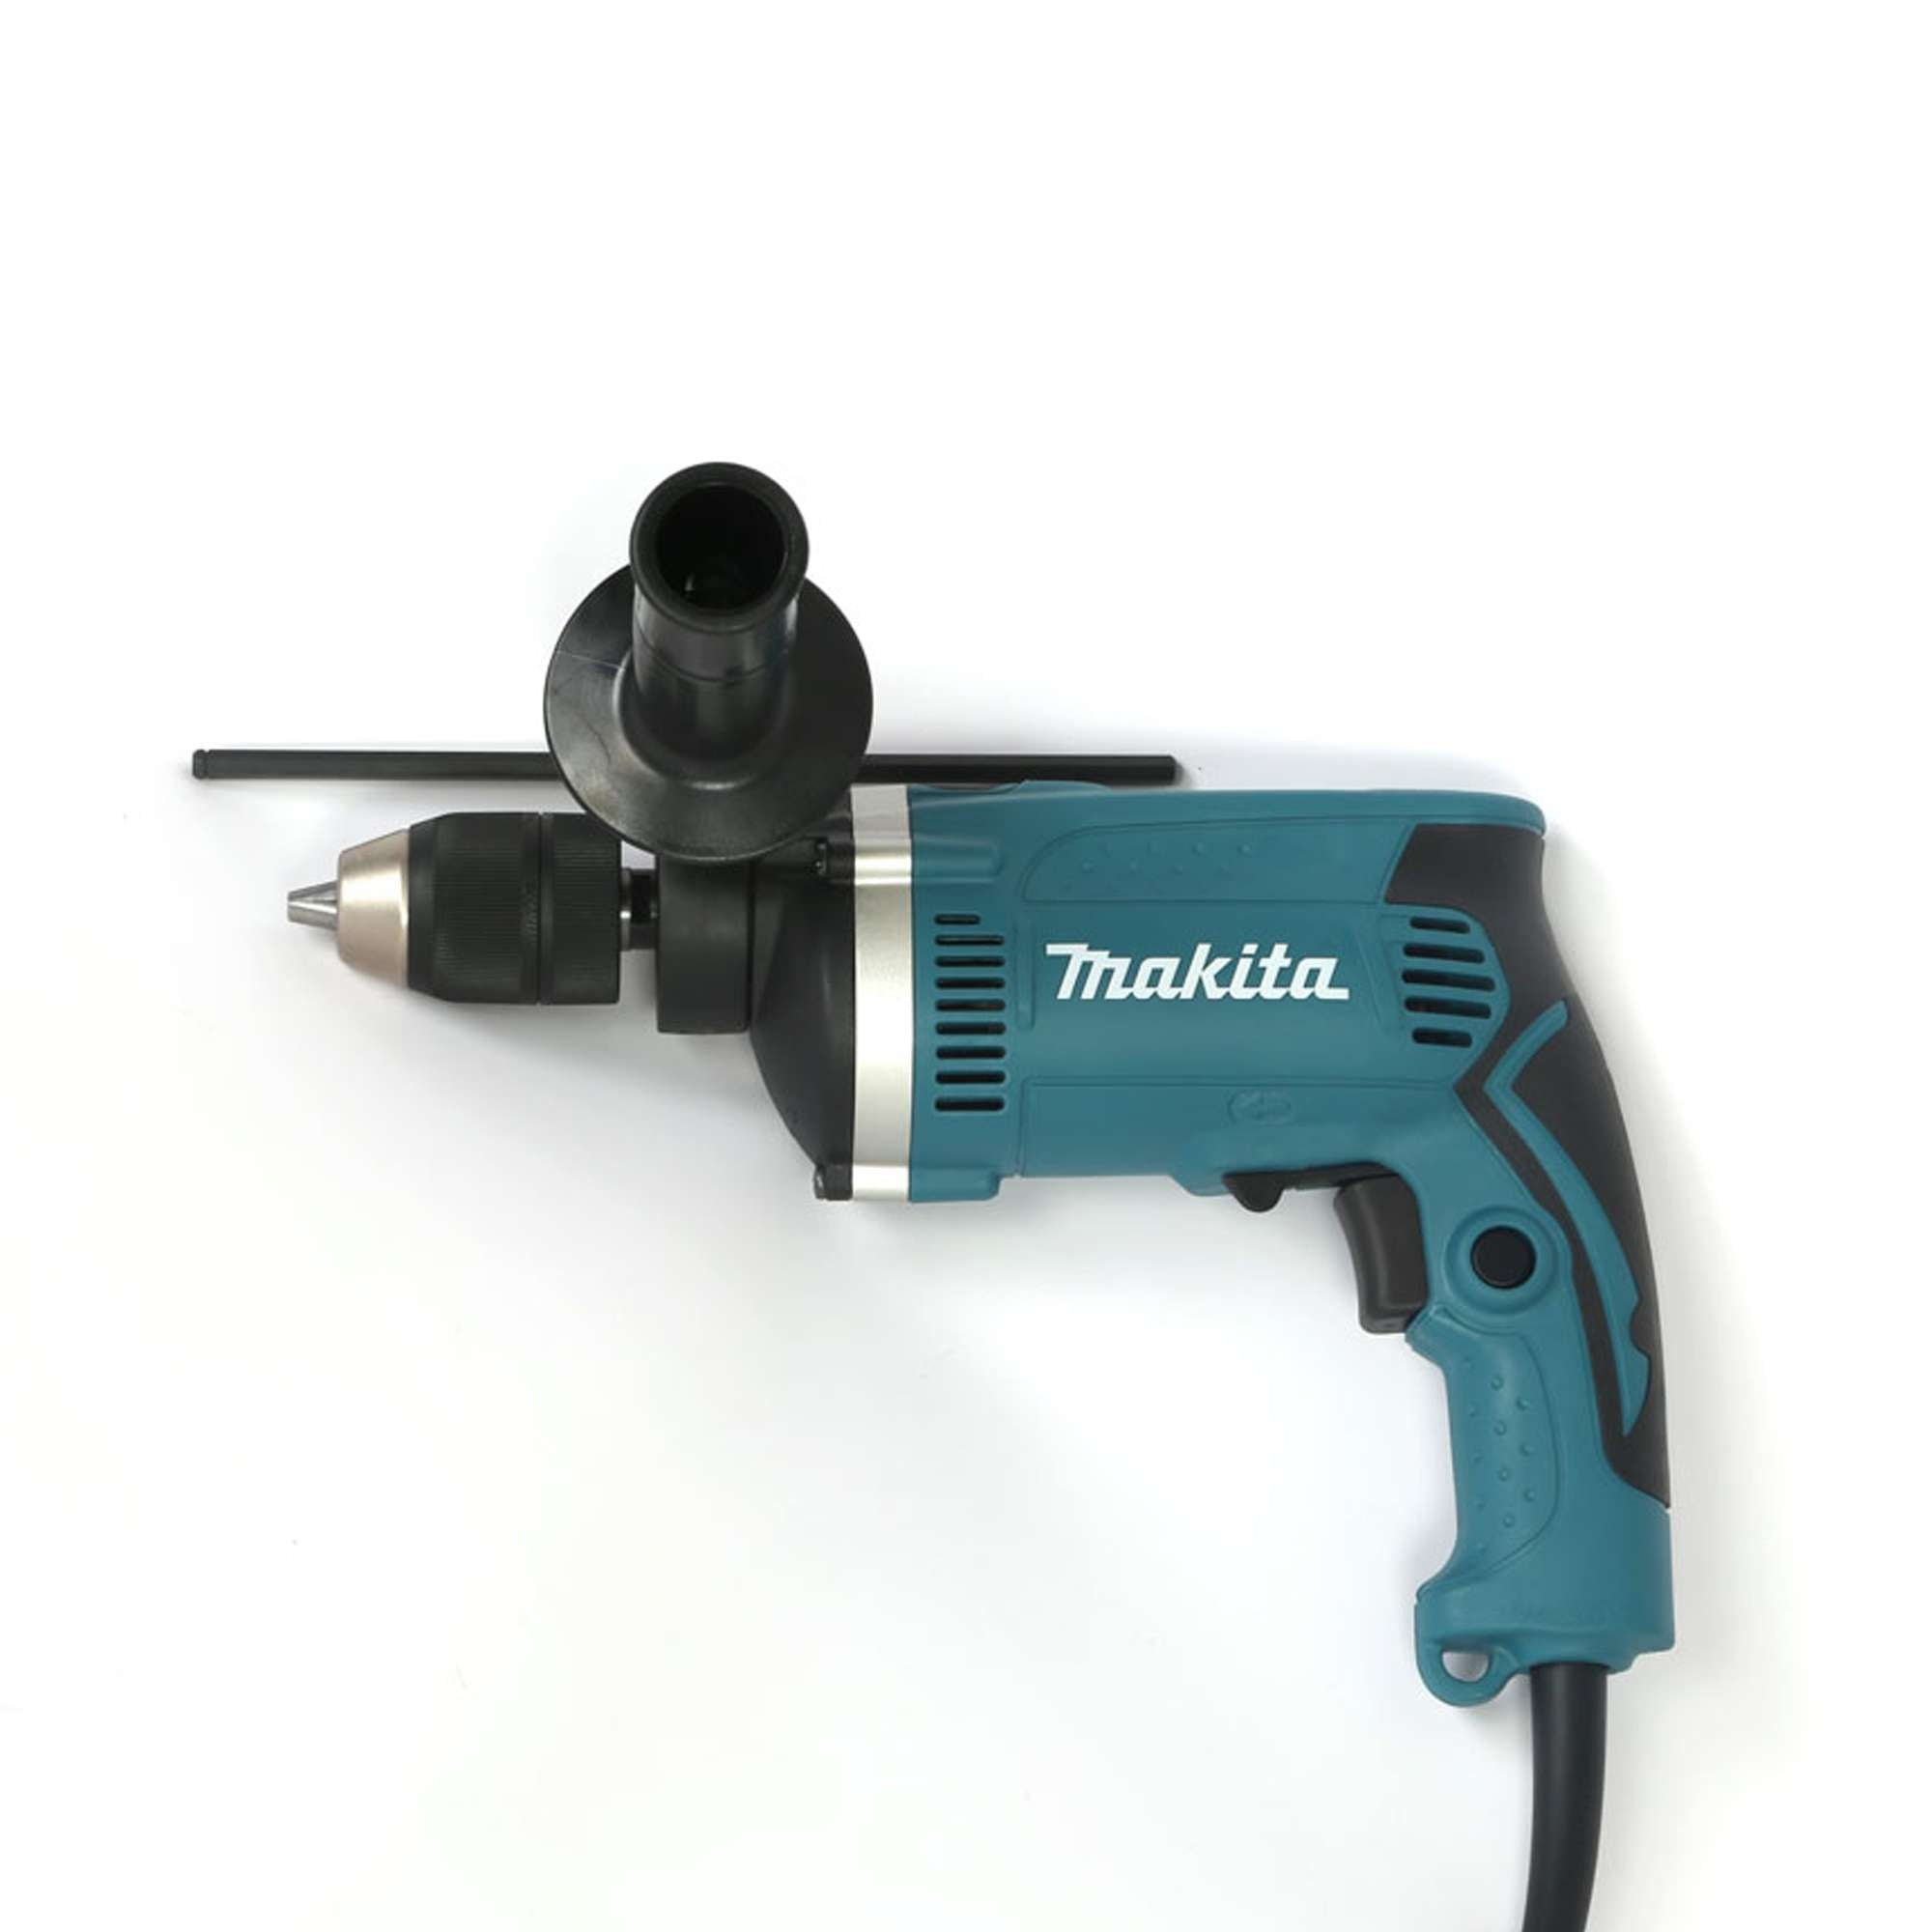 Makita 710 W Impact Drill Driver with 16mm drilling function - HP1631